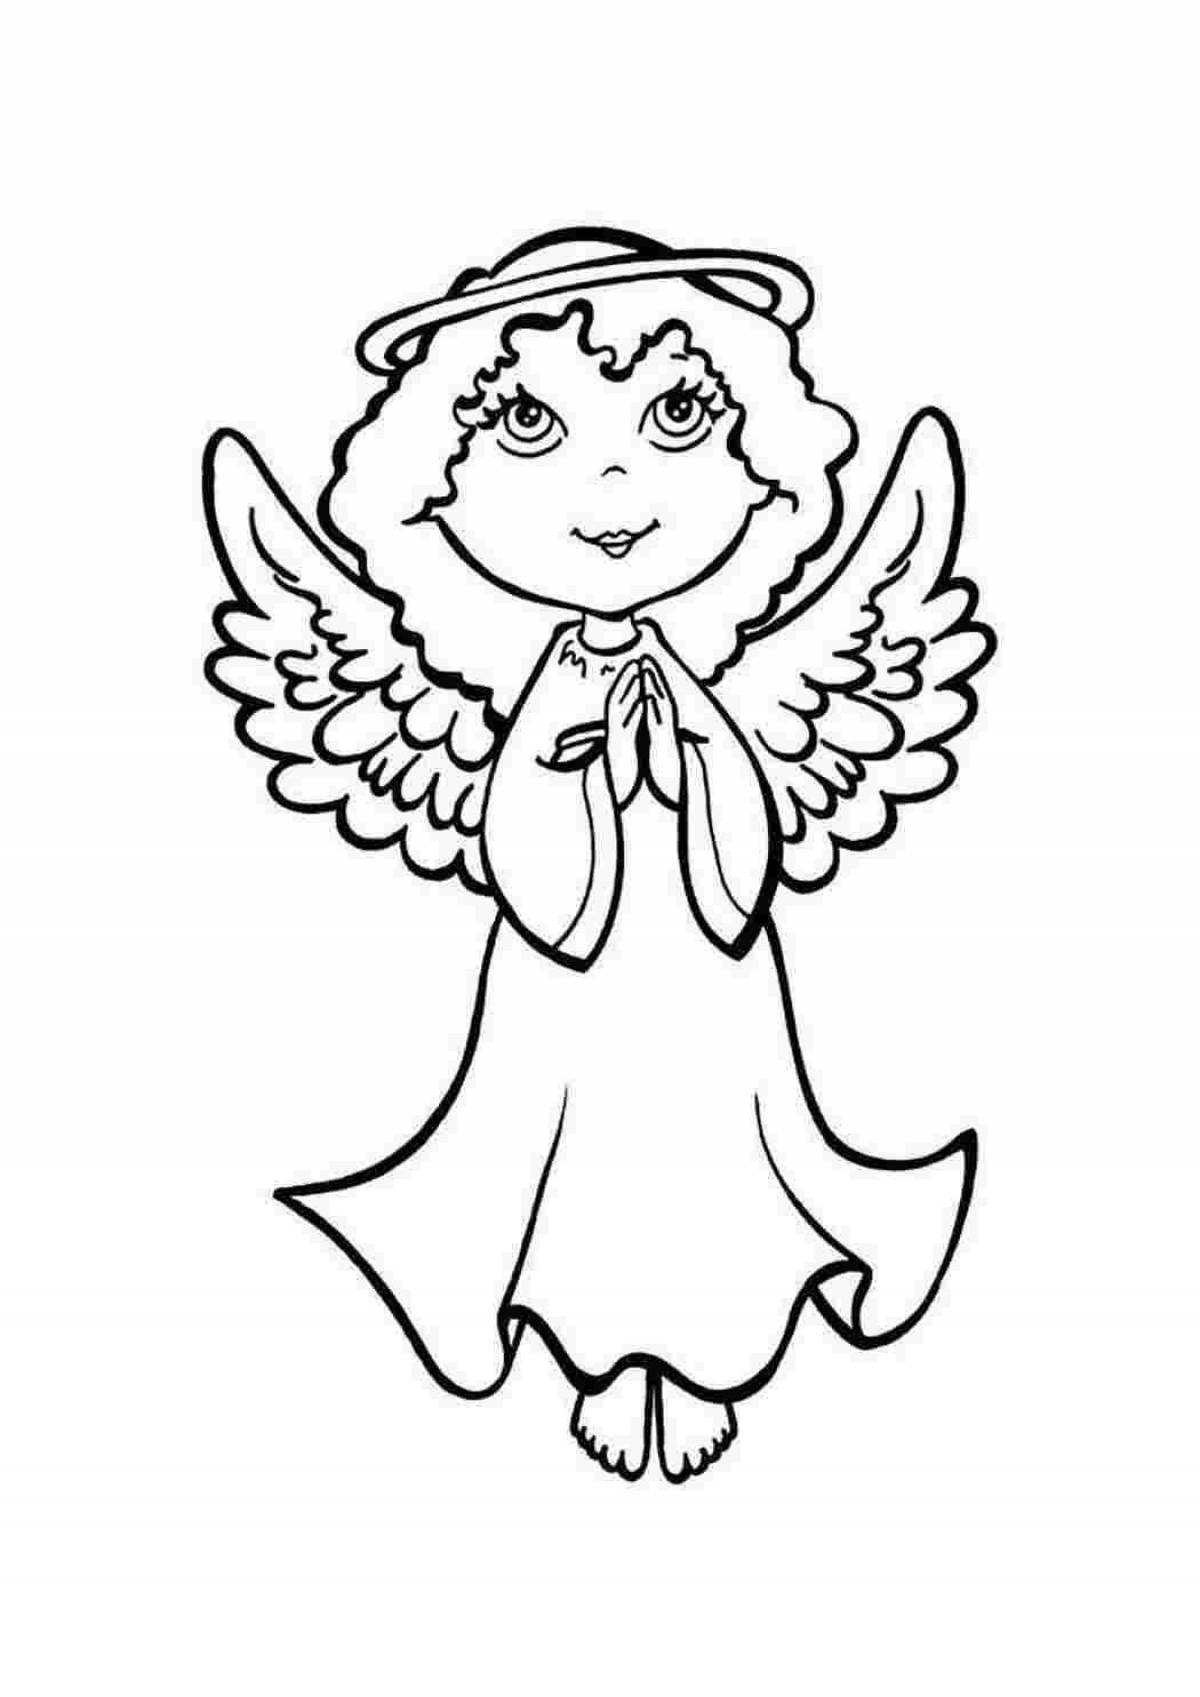 Exquisite angel coloring book for 3-4 year olds